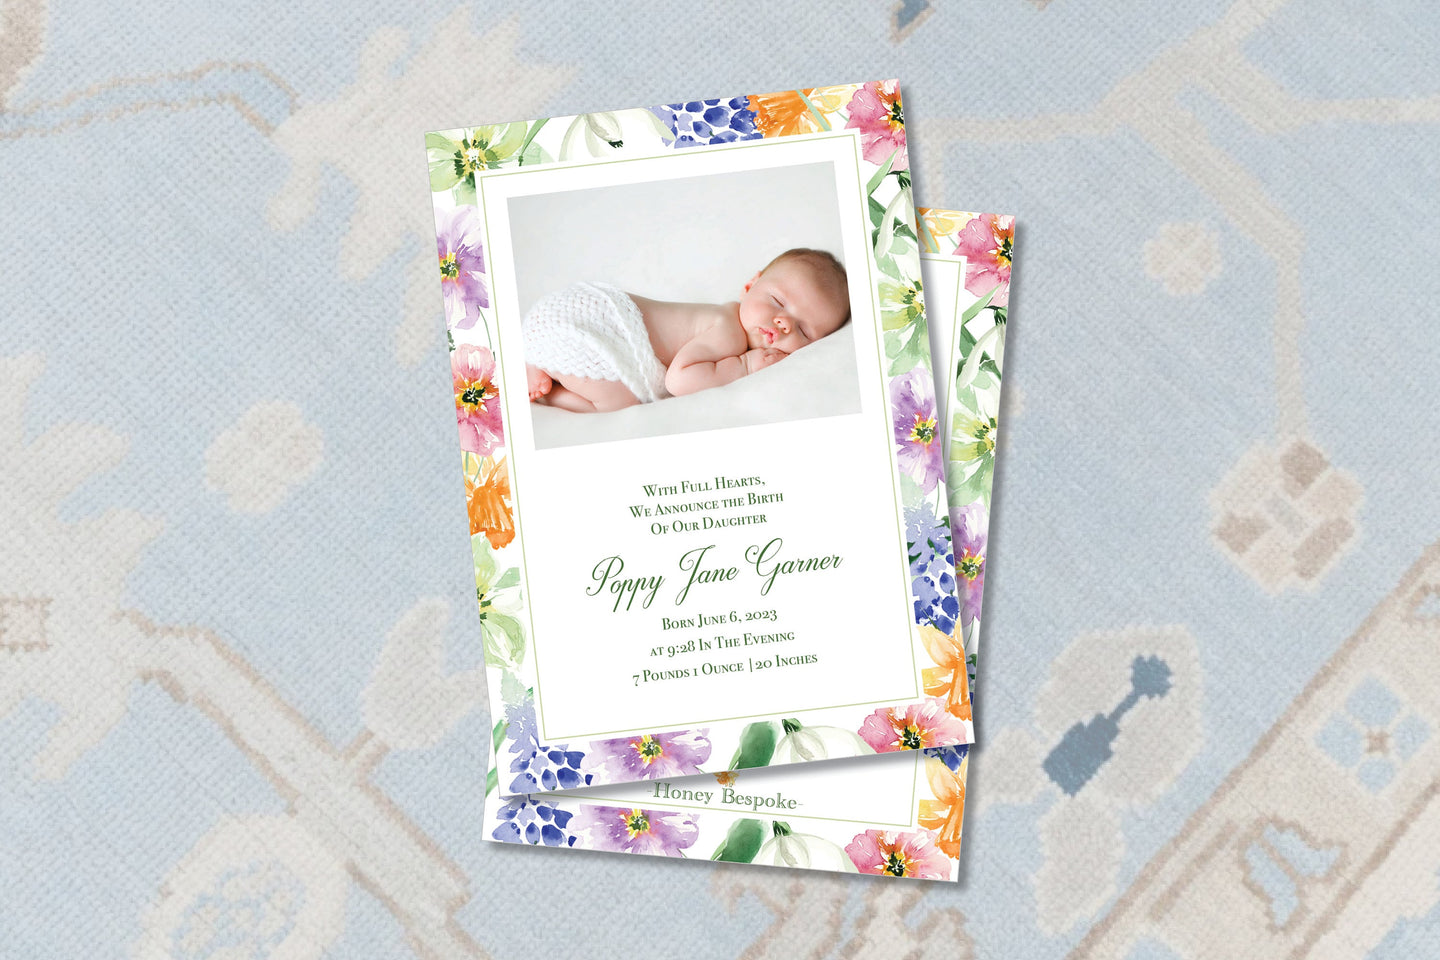 Watercolor Personalized Floral Baby Birth Announcement / Flower Baby Photo Card / Floral Birth / Girl / Invitation / Preppy / Printable Baby